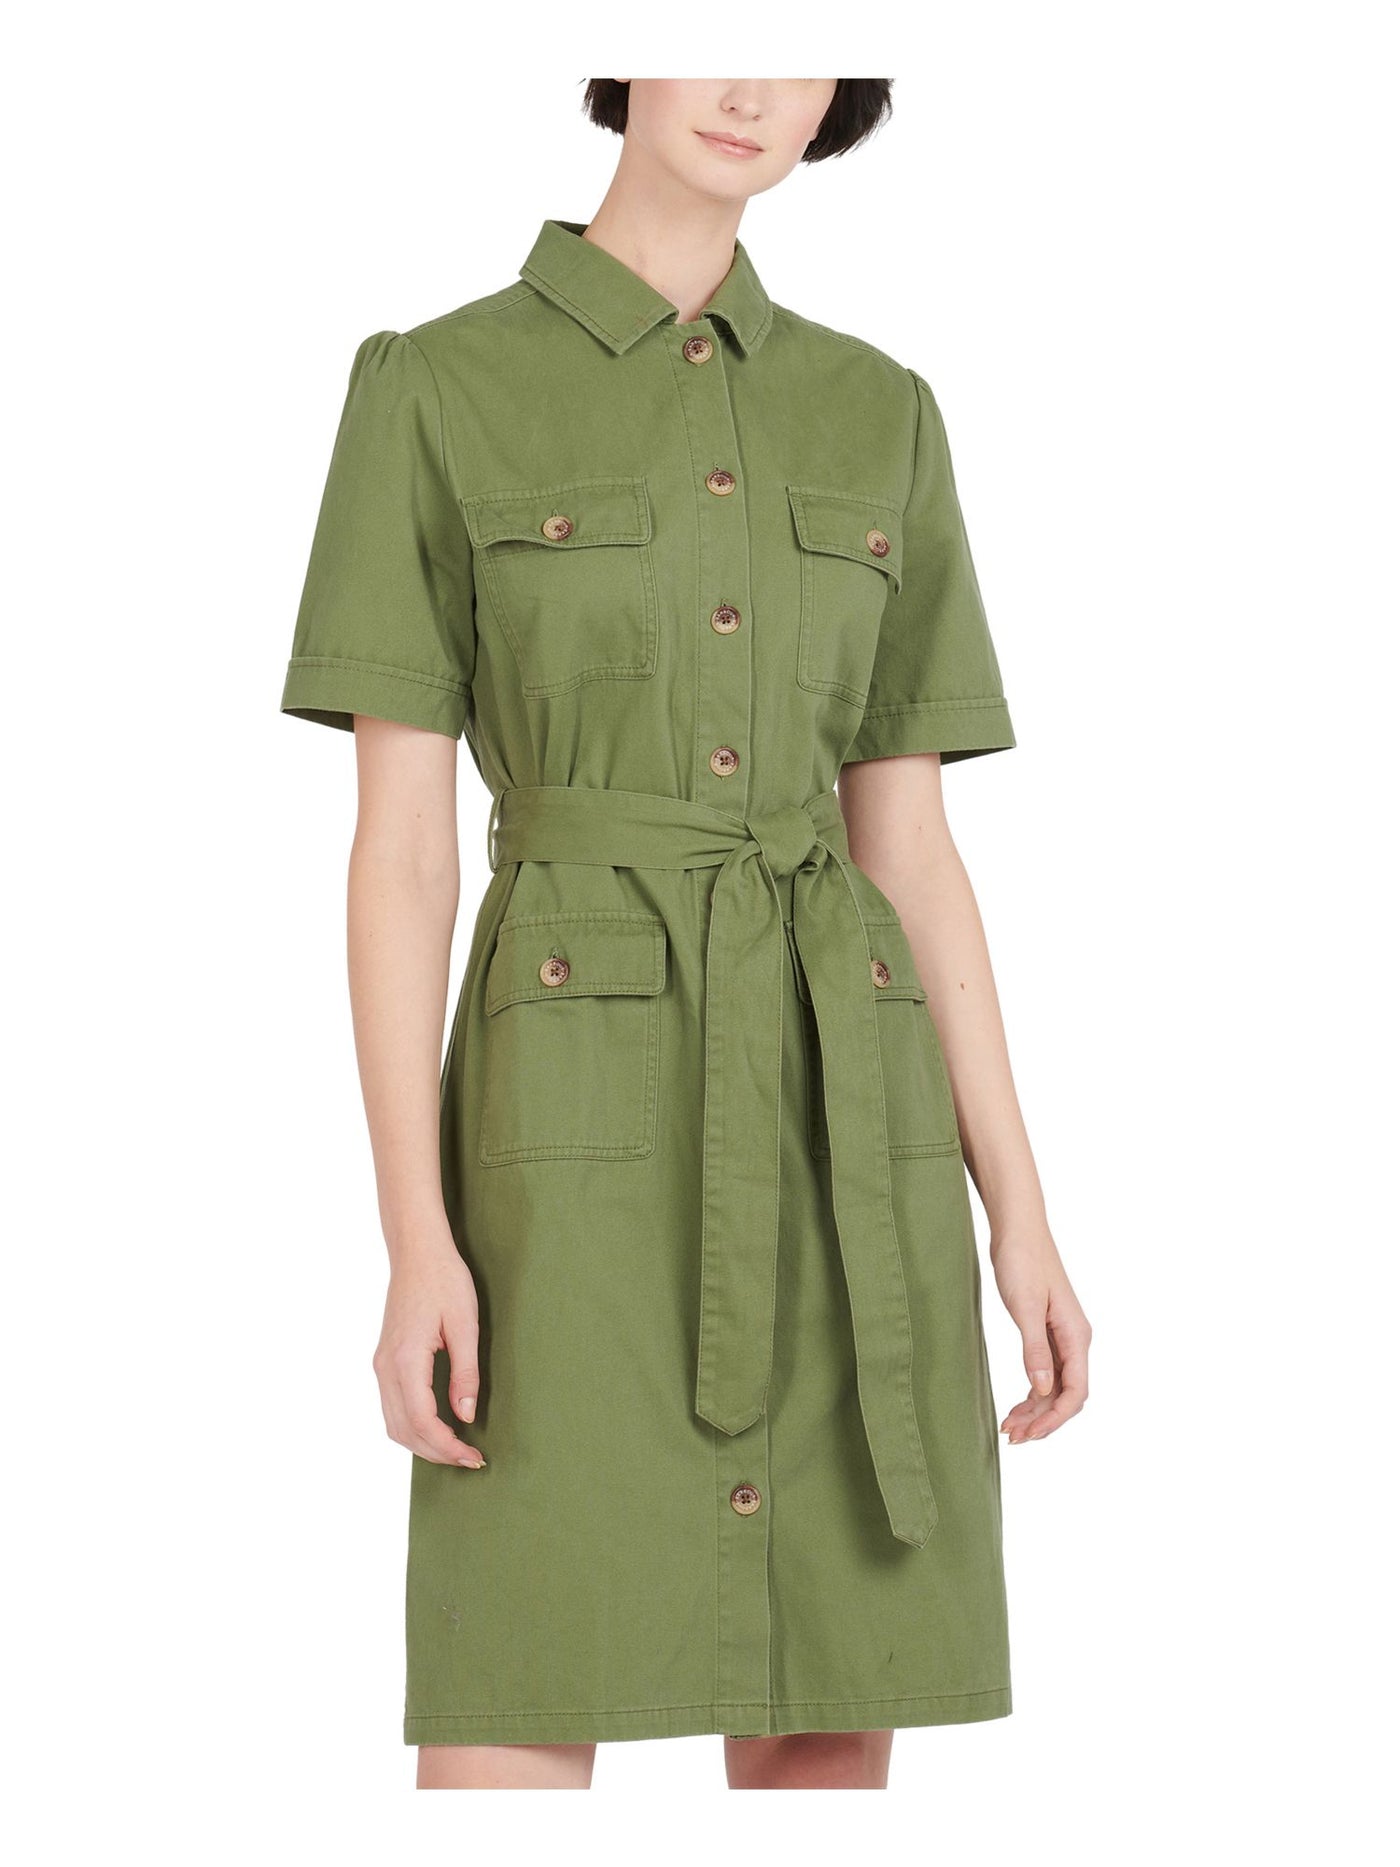 BARBOUR Womens Green Pocketed Point Collar Above The Knee Shirt Dress 14